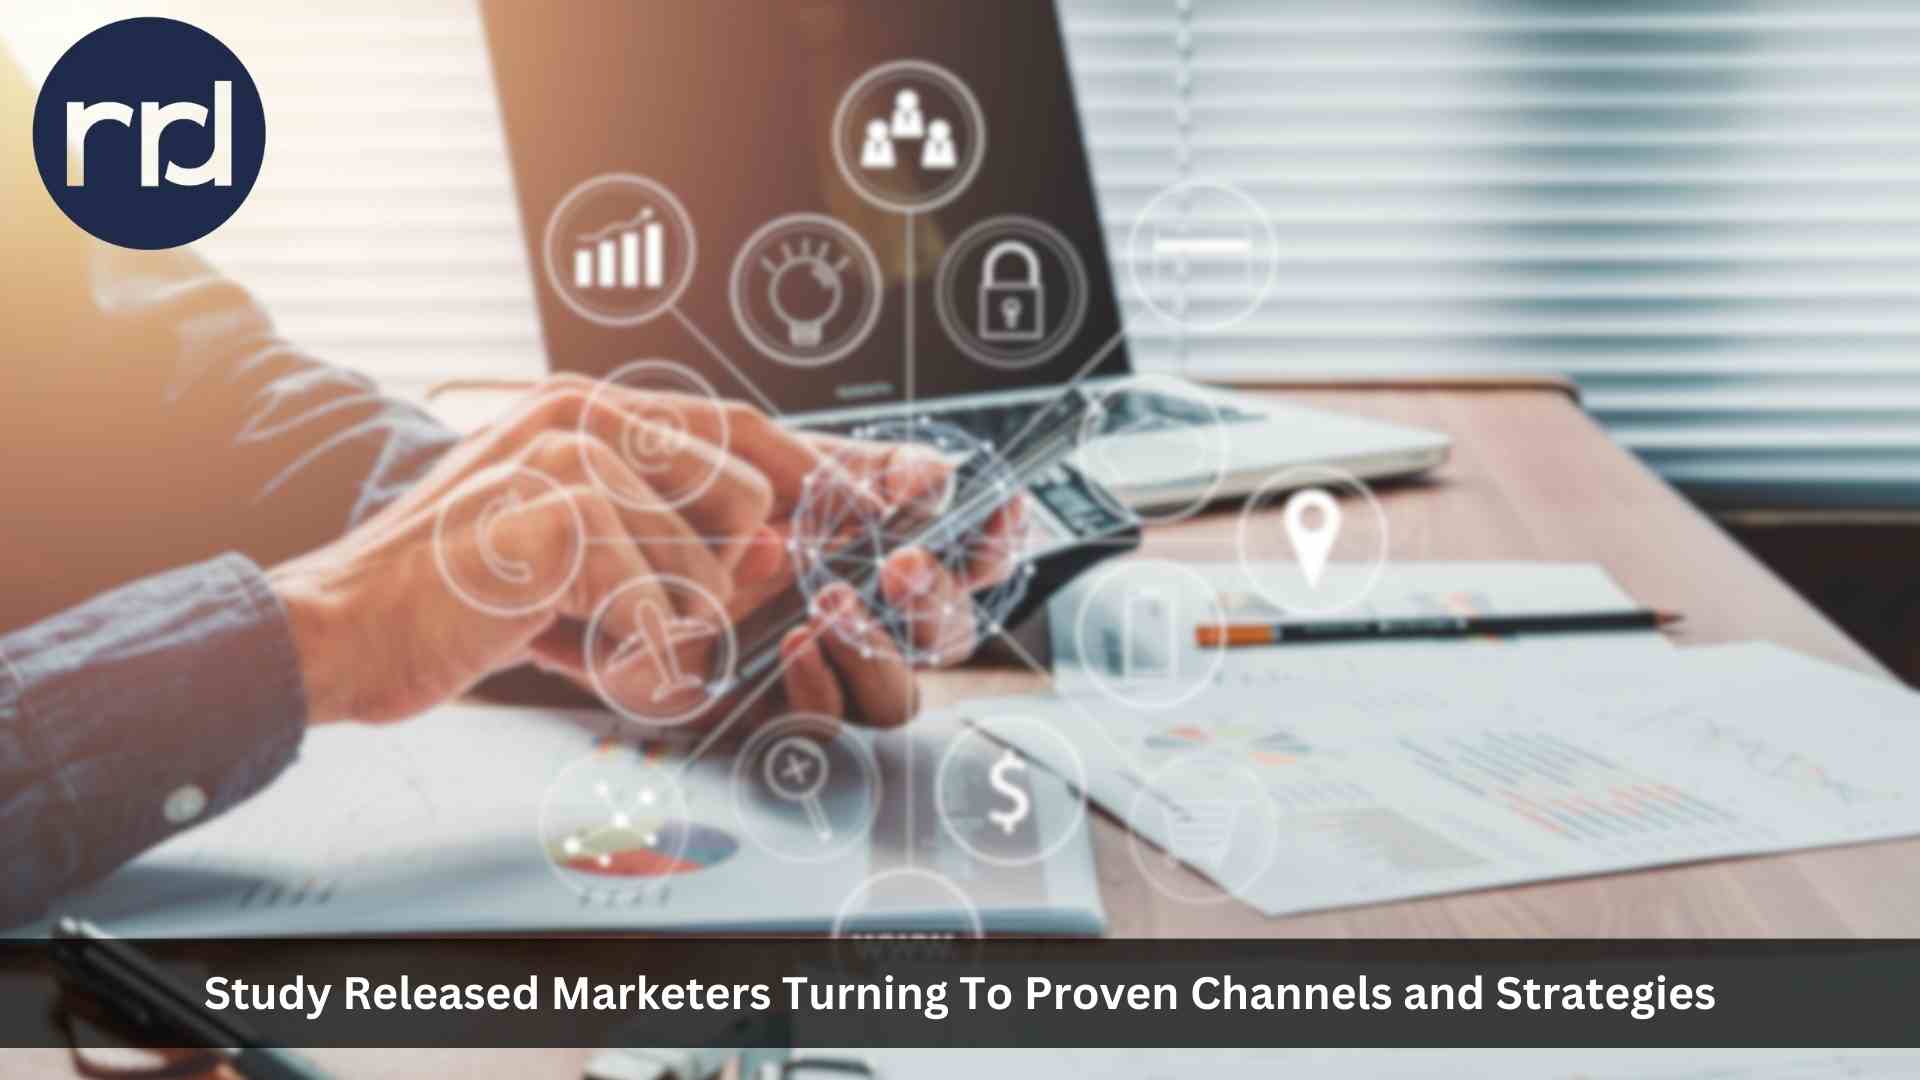 RRD Survey: Marketers Turning to Proven Channels and Strategies